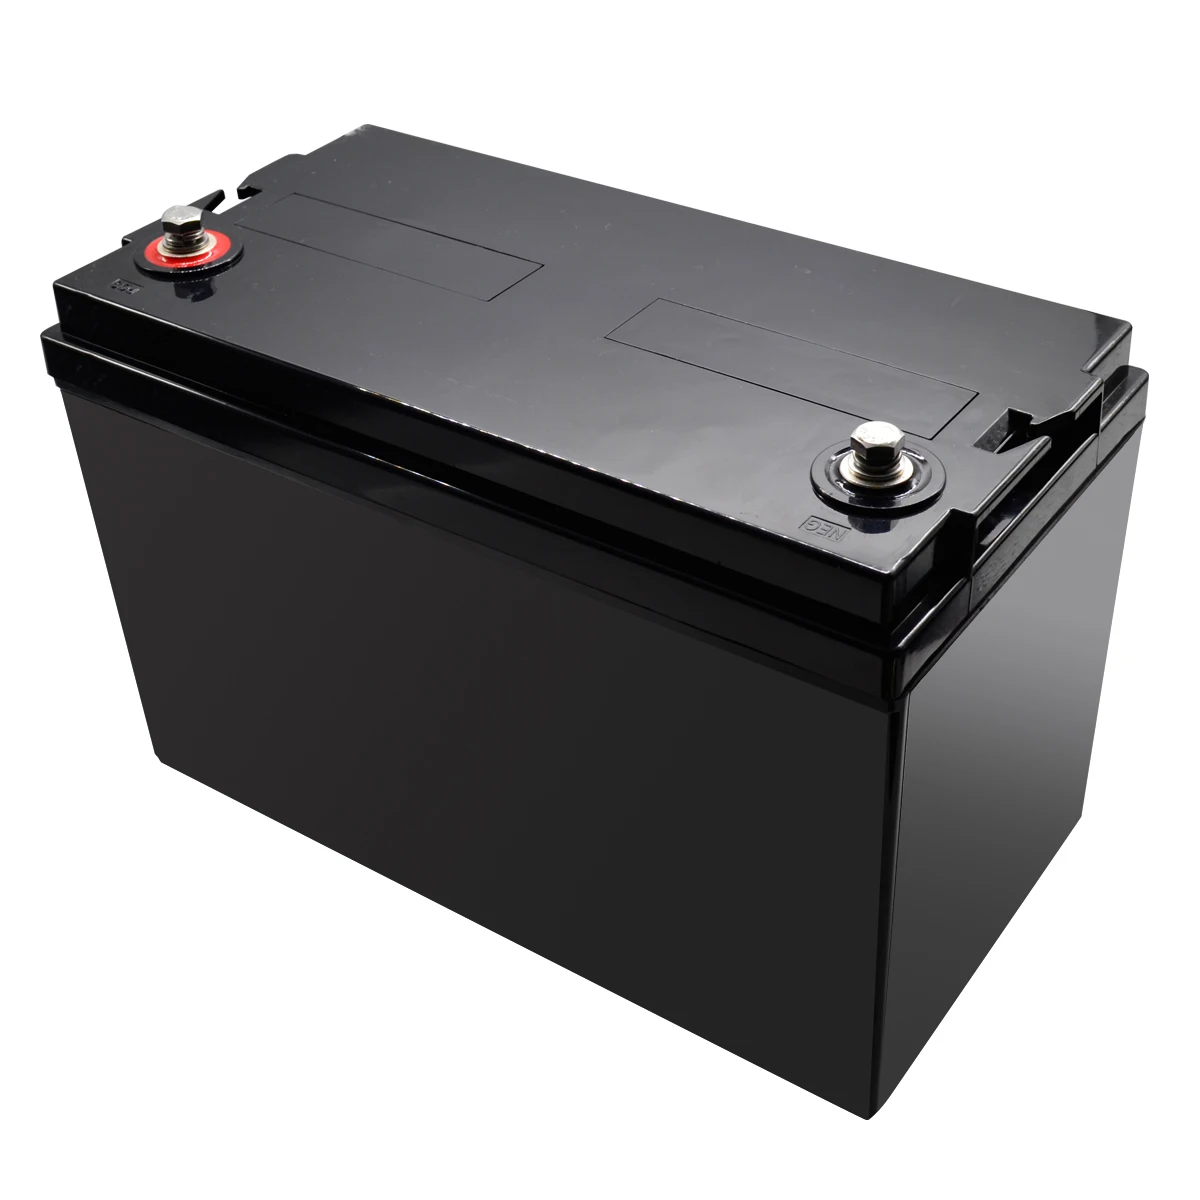 2500mAh 60 volt electric car battery 18650 lithium ion battery pack